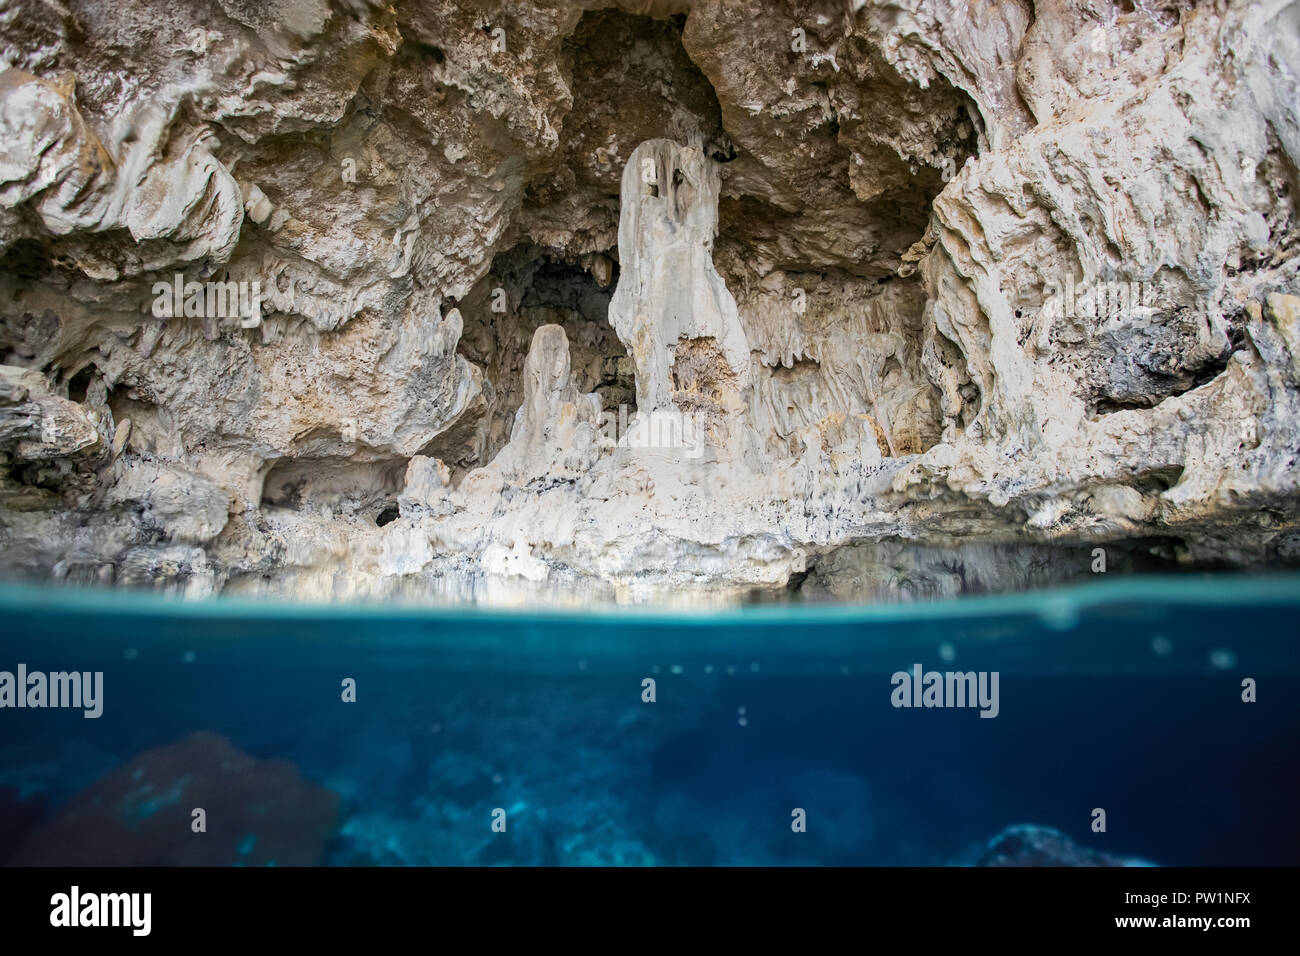 Underwater Photo of Avaiki Cave.This is a historical site where the first canoe landed, Niue Island, Niue. Stock Photo